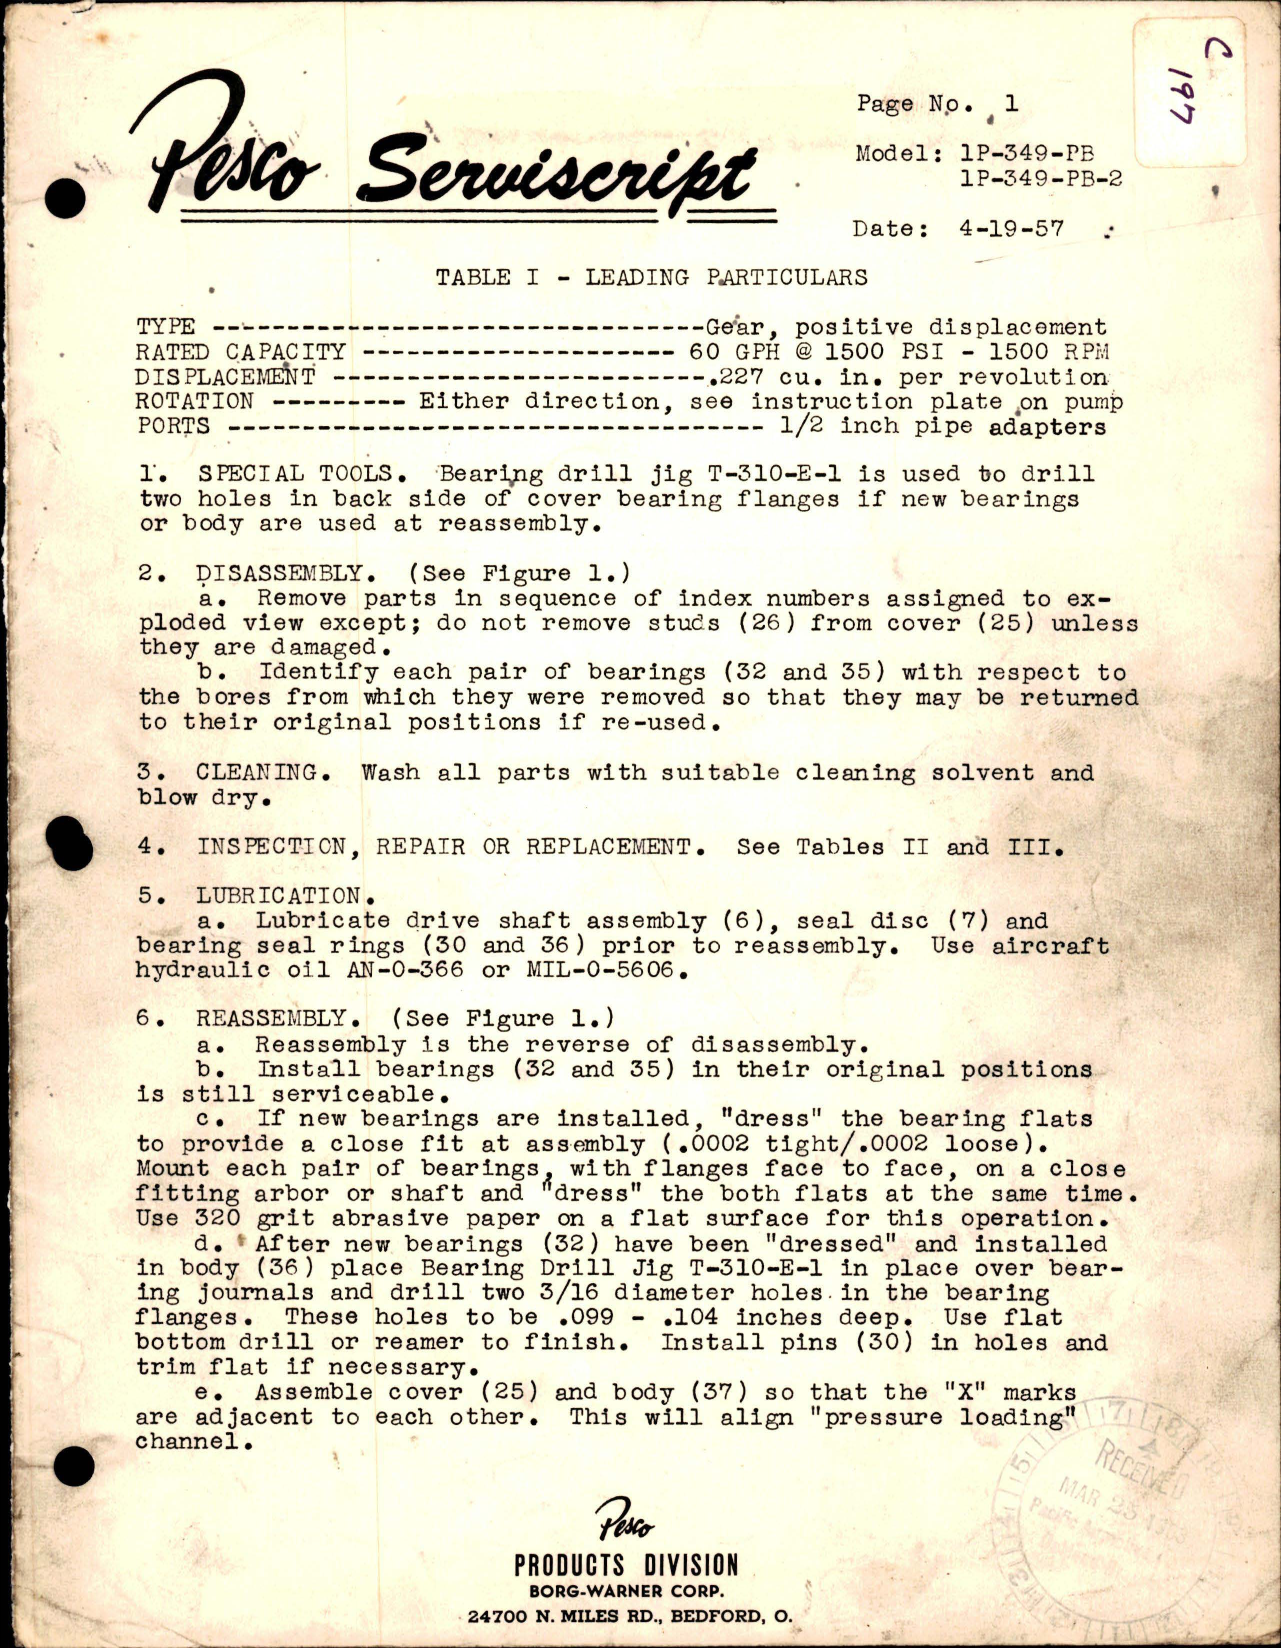 Sample page 1 from AirCorps Library document: Leading Particulars for Hydraulic Pump - Model 1P-349-PB and 1P-349-PB-2 